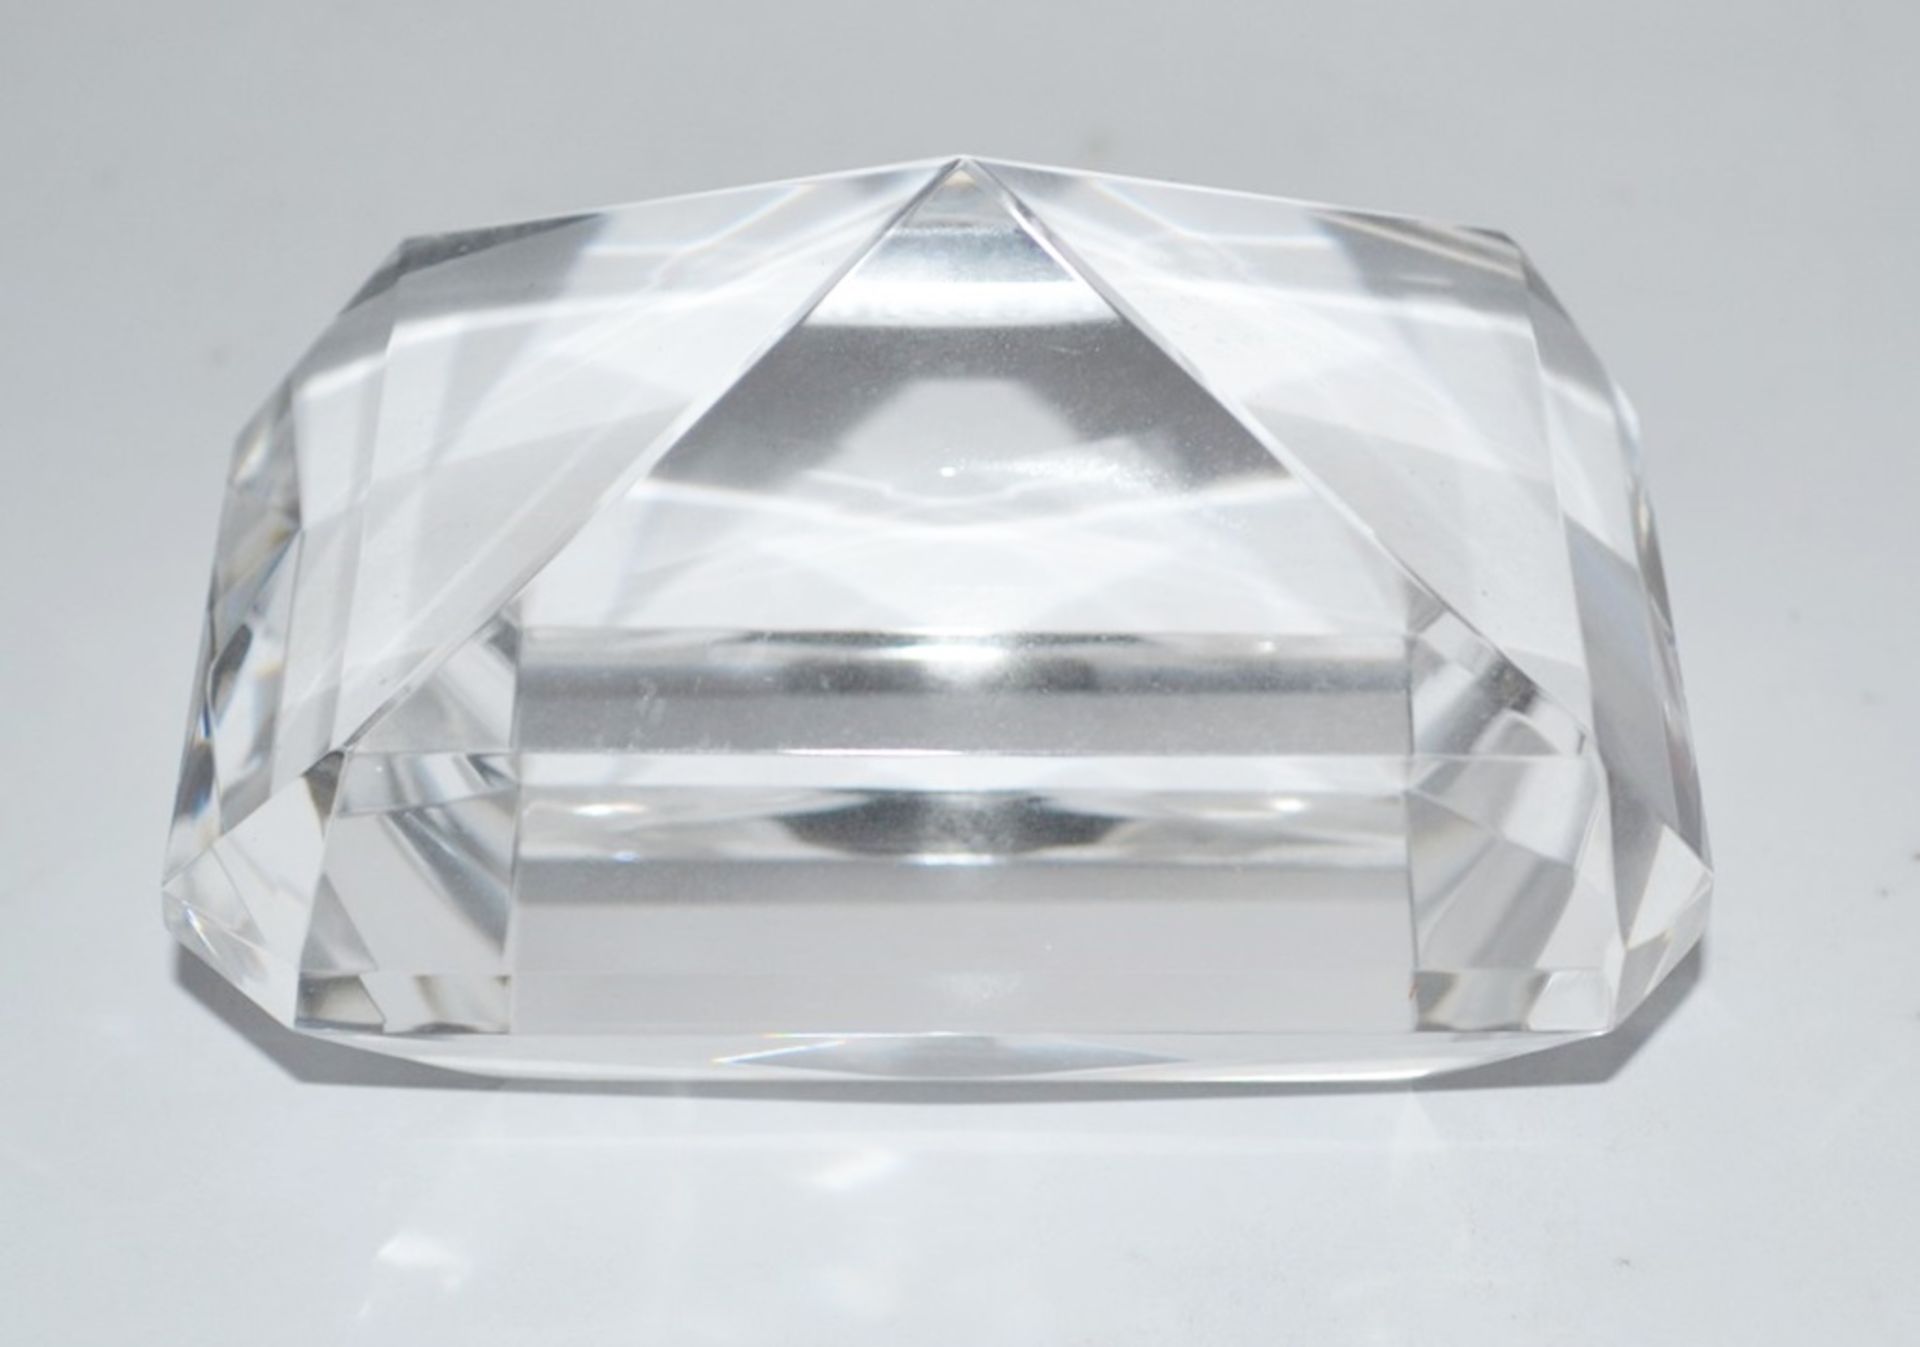 10 x ICE London Emerald Shaped Crystal Paperweight - Colour: Clear - 100mm In Diameter - New & Boxed - Image 3 of 4